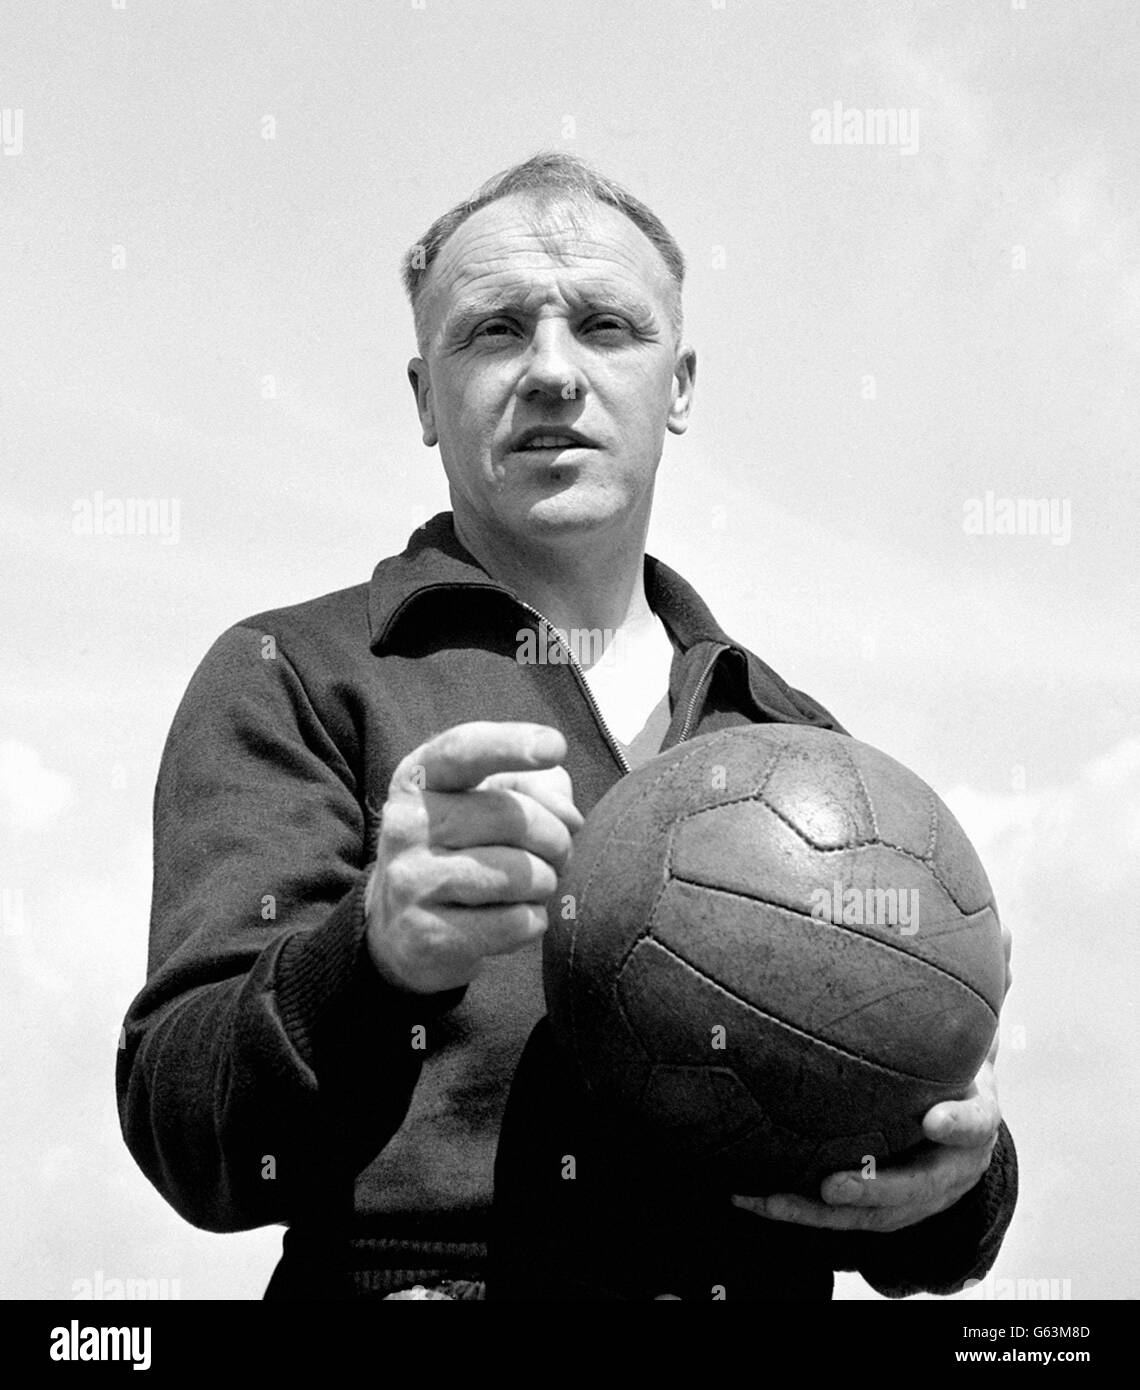 Bill Shankly has just signed the first contract of a managerial career taking in Carlisle, Workington, Grimsby, Huddersfield, and Merseyside. It is to be a three-year contract for Liverpool. Stock Photo